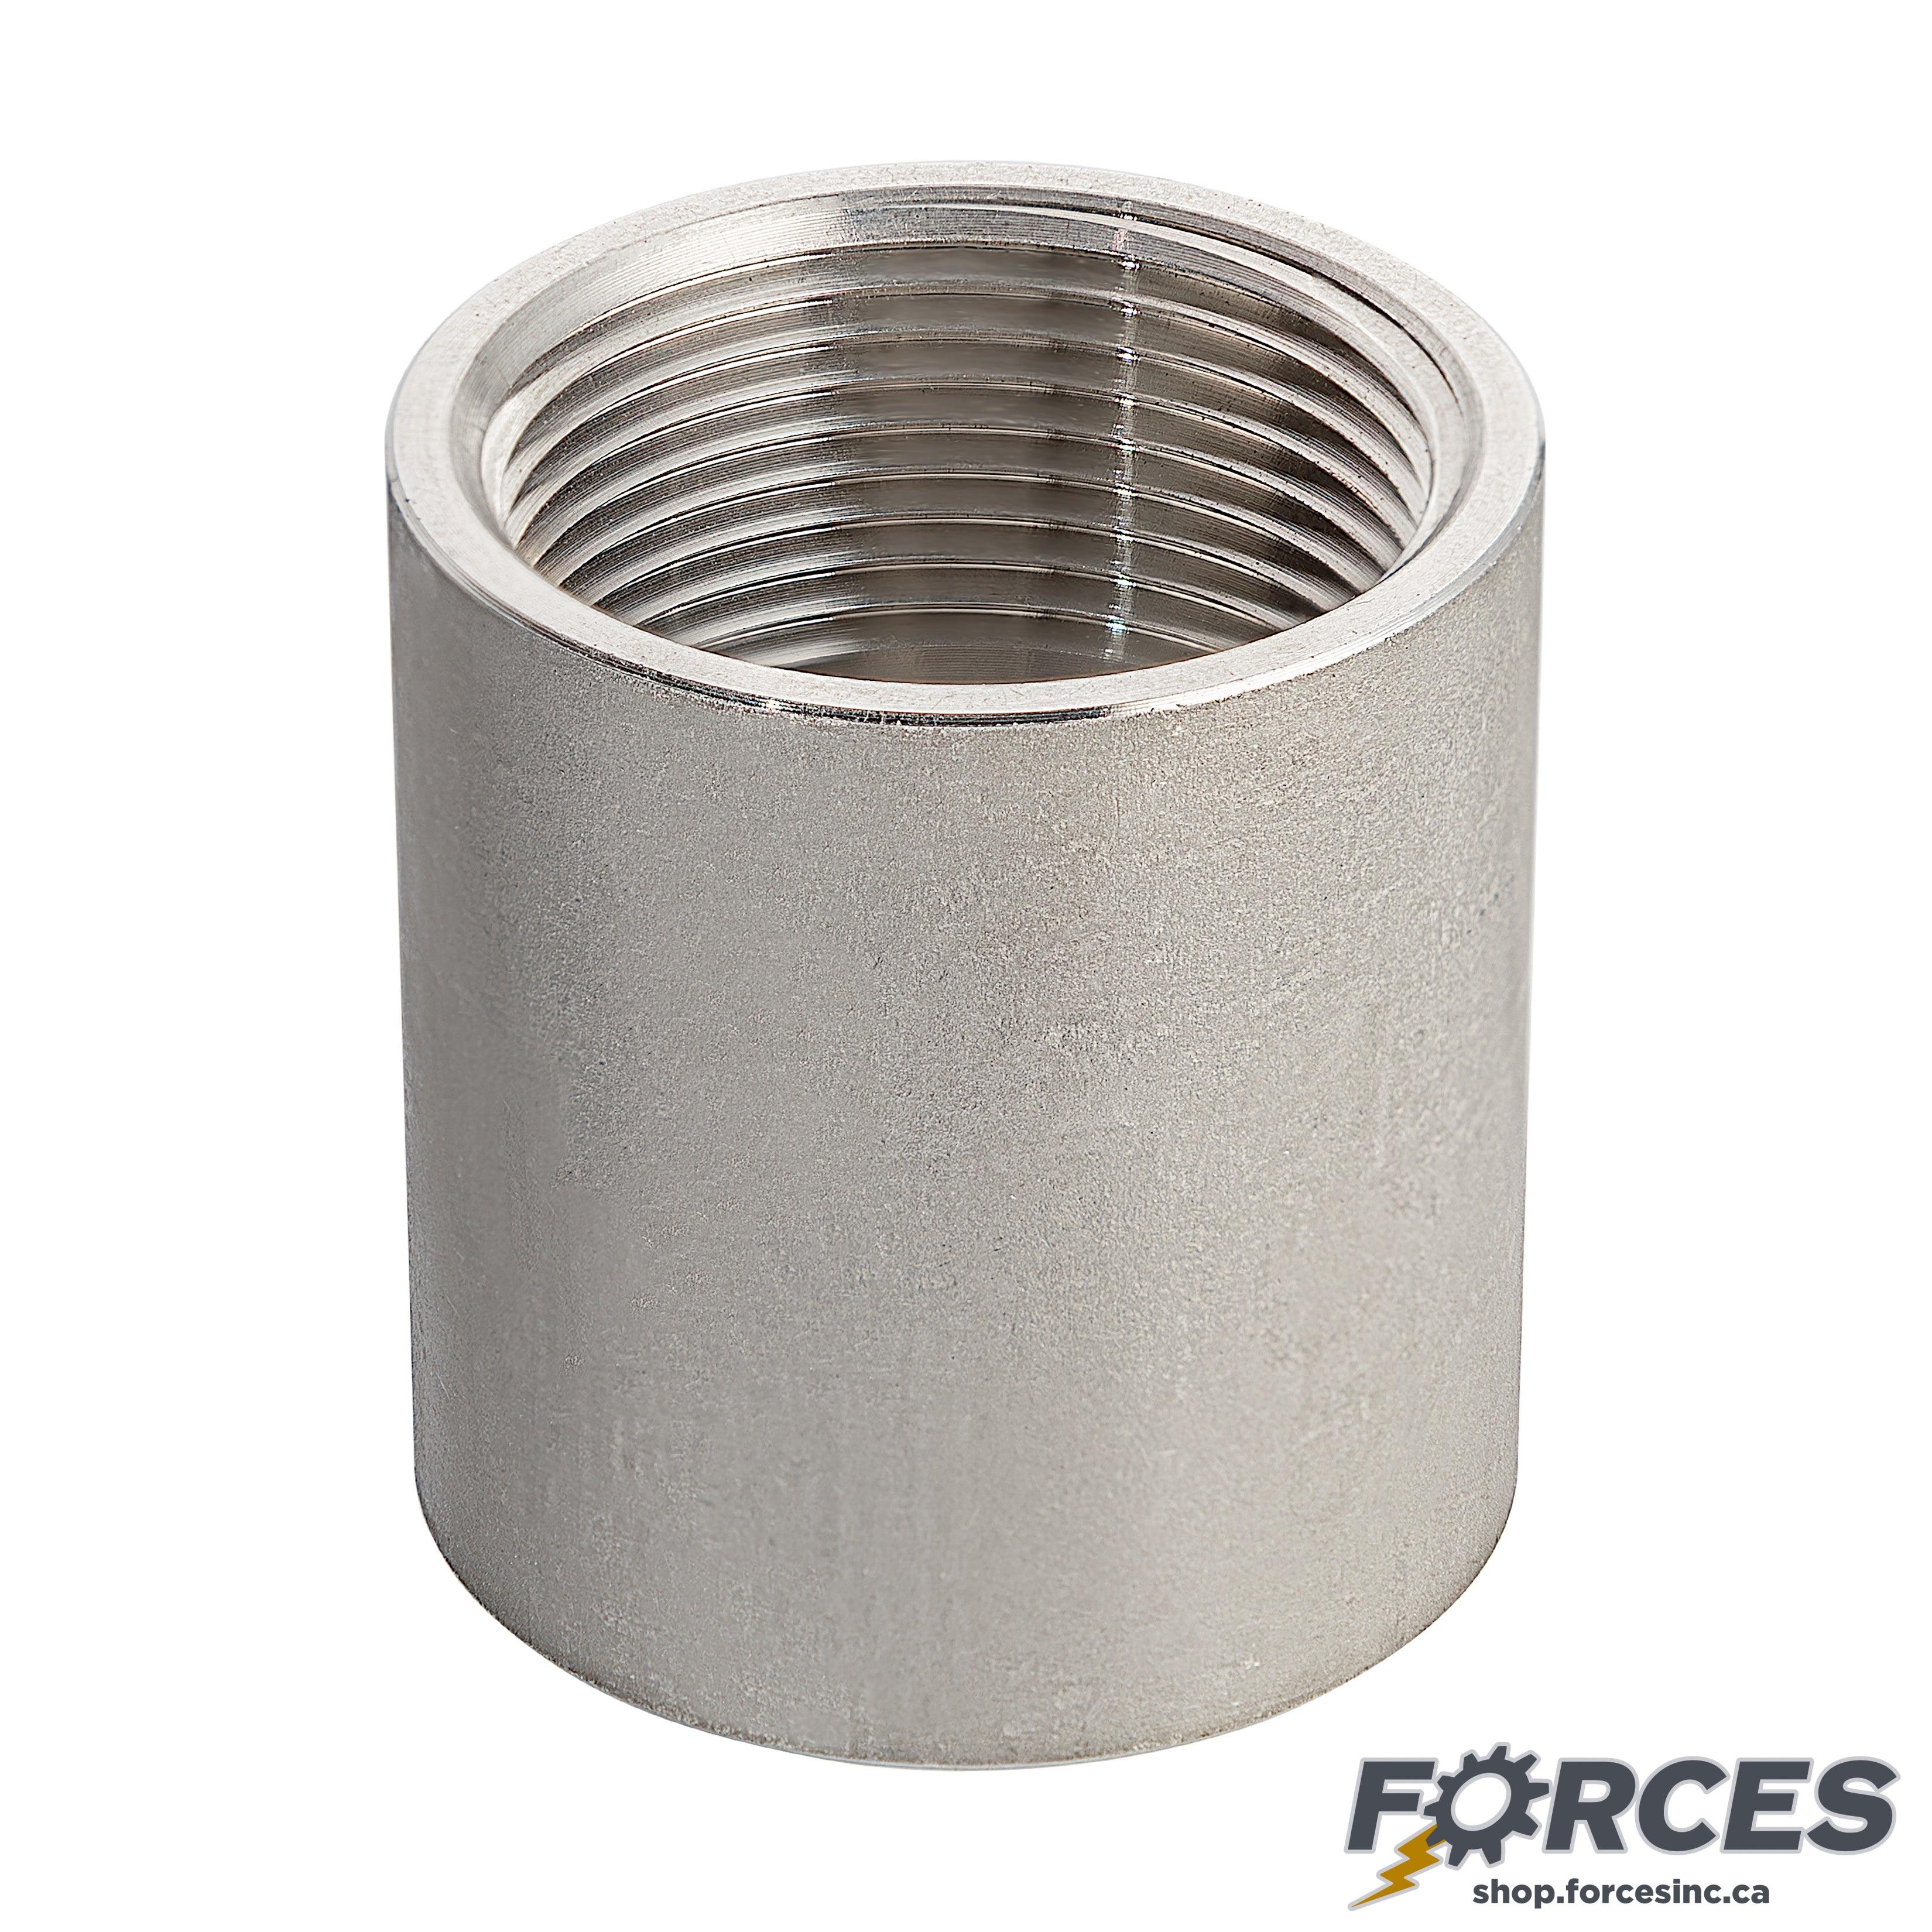 3/4" Coupling NPT #150 - Stainless Steel 316 - Forces Inc